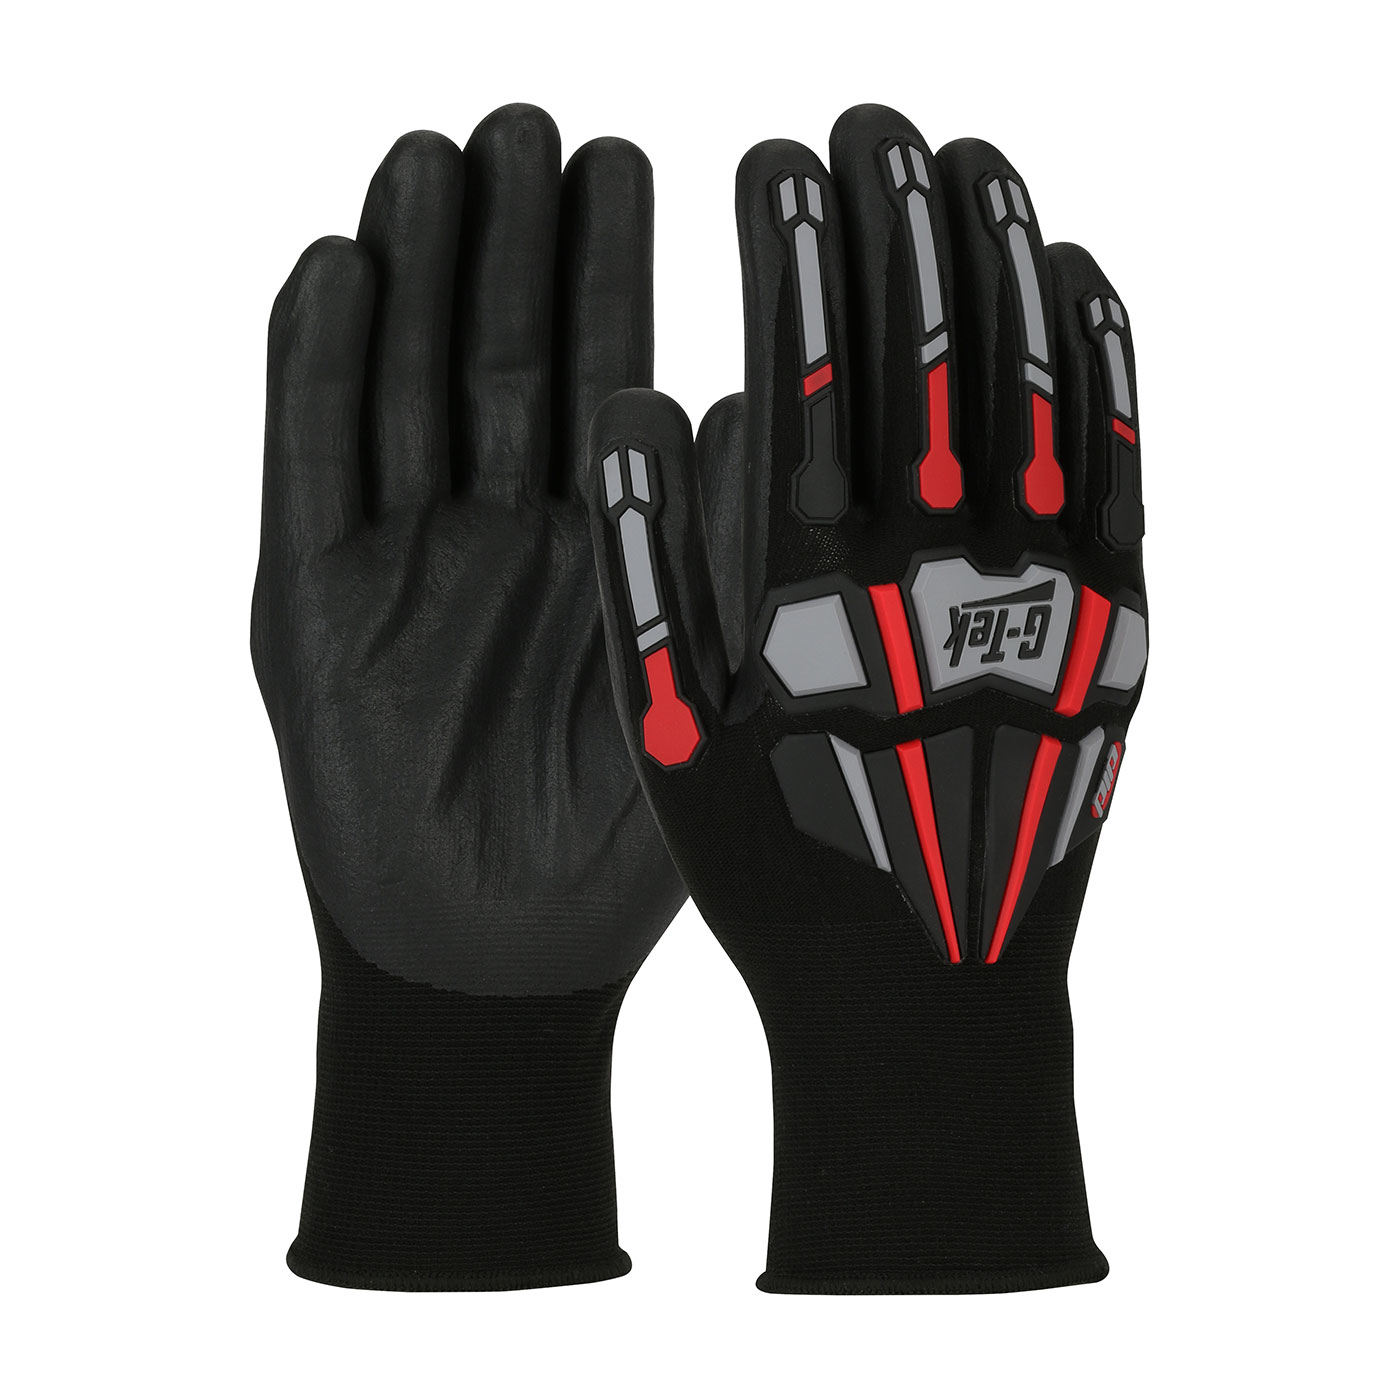 34-MP150 PIP® G-Tek® GP™ Seamless Knit Nylon Glove with Impact Protection and Nitrile Coated Foam Grip on Palm & Fingers